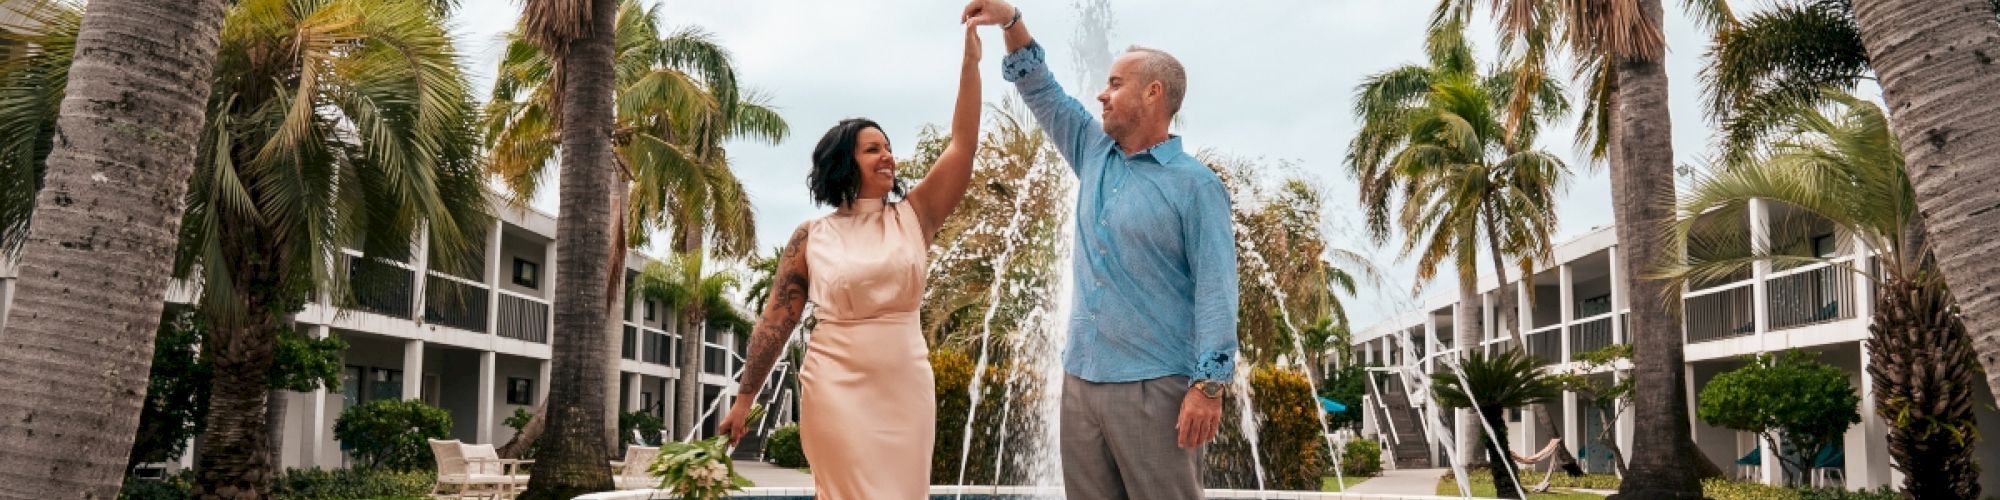 A couple dances in front of a fountain, surrounded by palm trees and buildings, creating a picturesque and romantic setting.